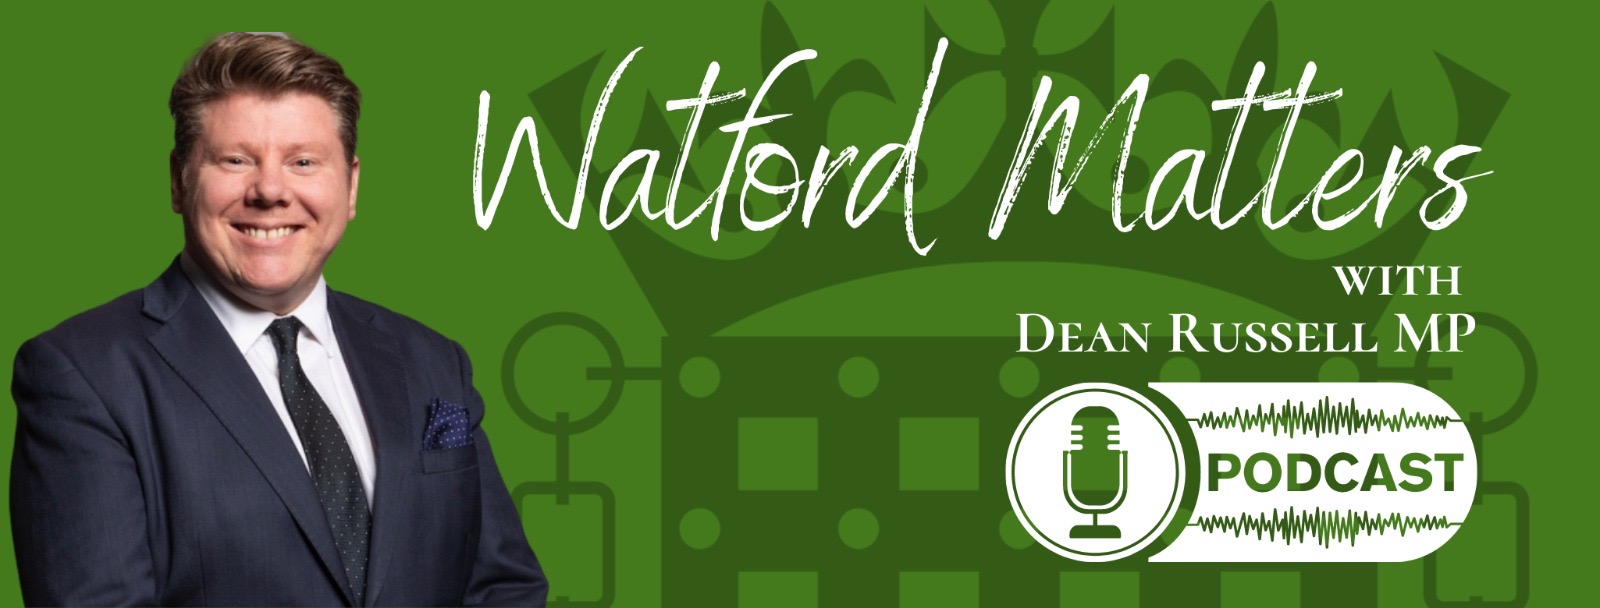 Watford Matters with Dean Russell MP Podcast Banner